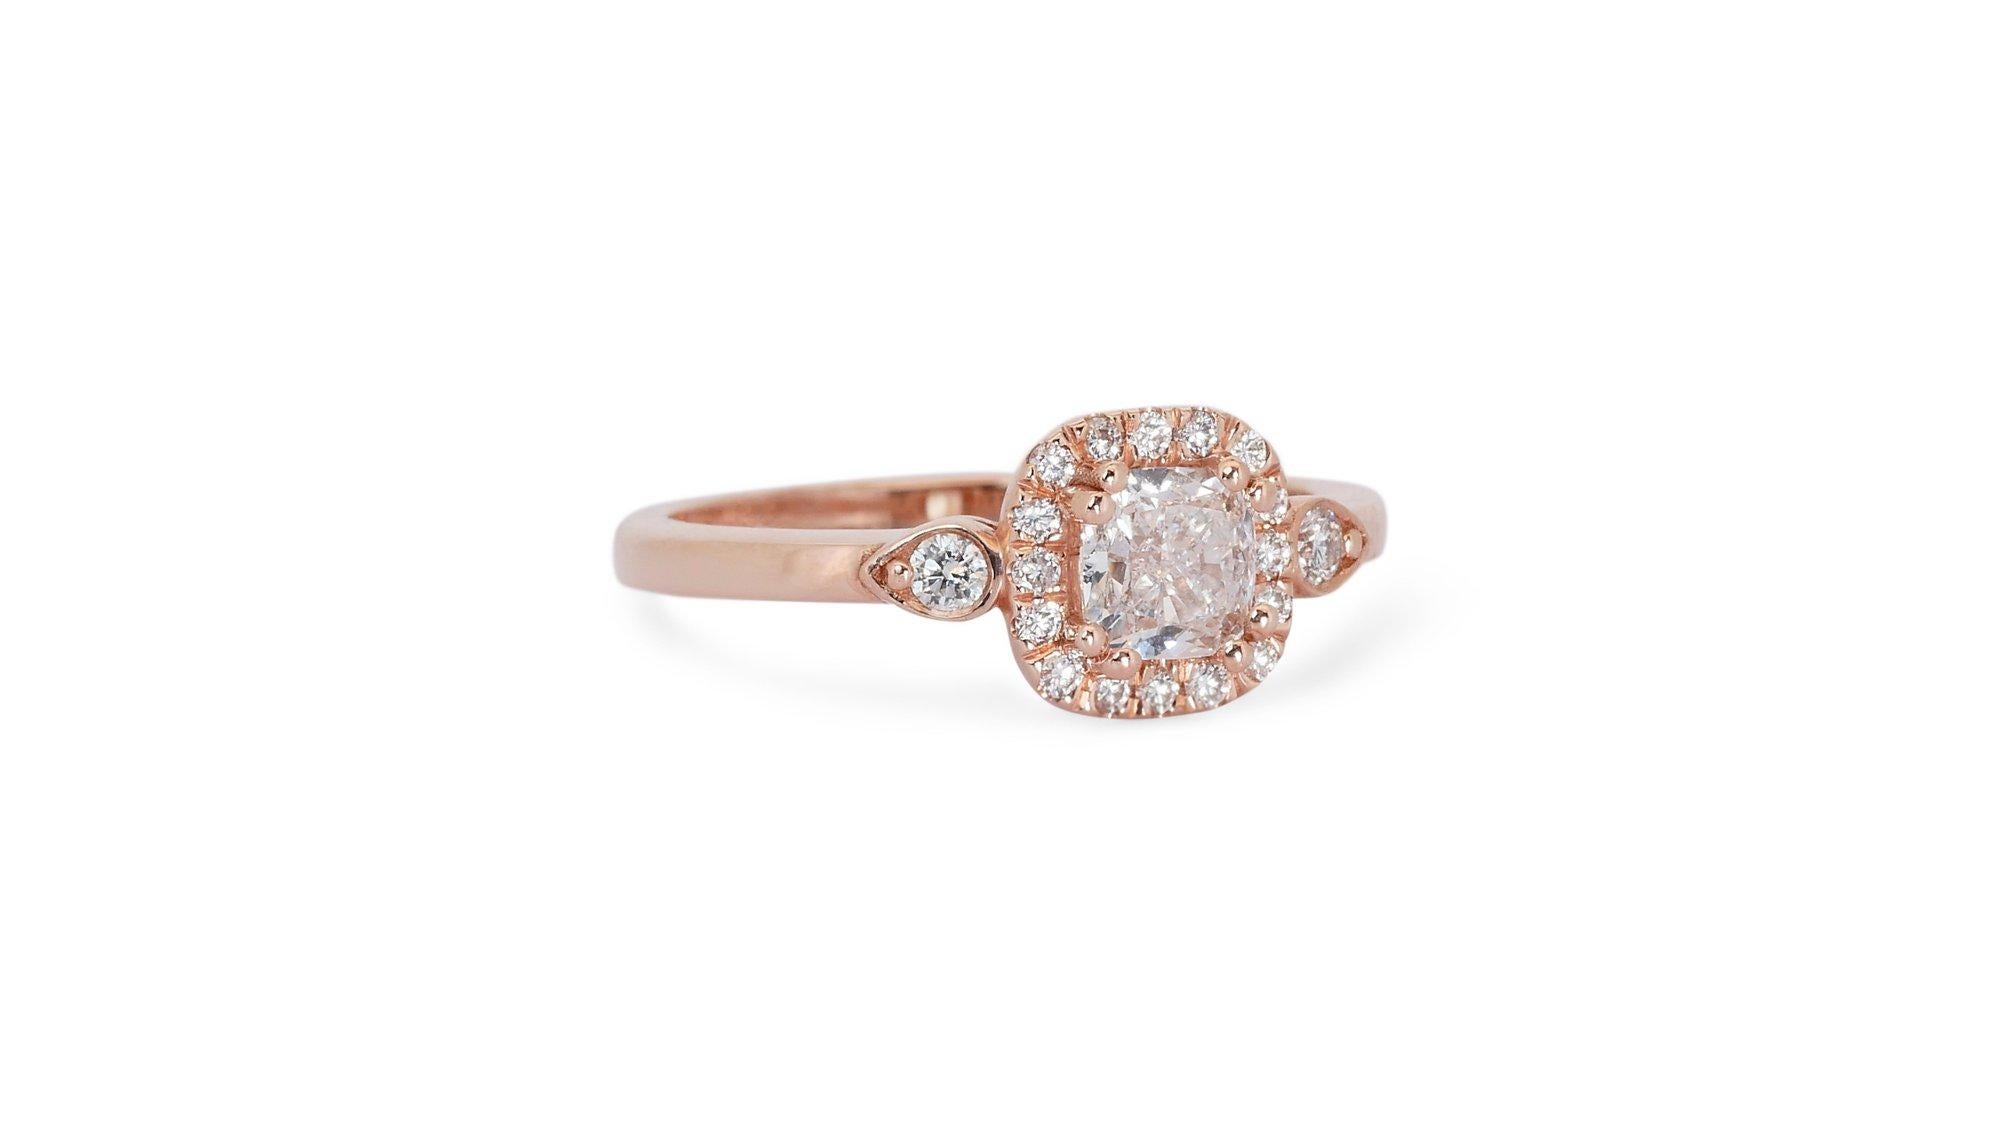 Dazzling 1.10ct Diamonds Halo Ring in 18k Rose Gold - GIA Certified

Embrace the allure of timeless elegance with this captivating 18k rose gold diamond halo ring. At its center lies a pristine 0.80-carat cushion-cut diamond, boasting an exceptional